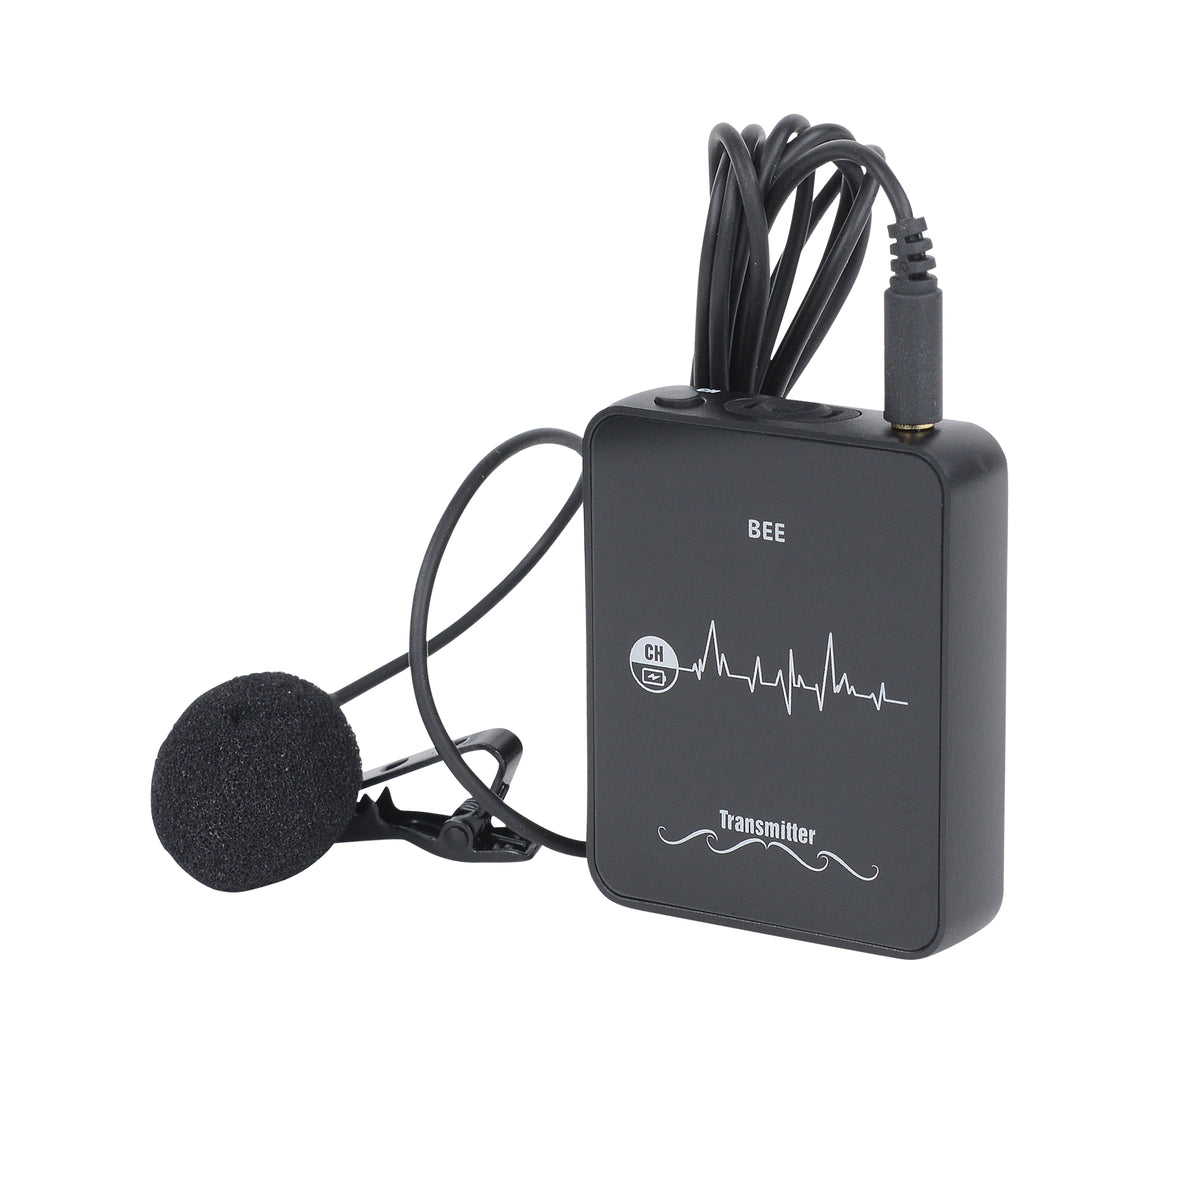 Compact Wireless Mic System